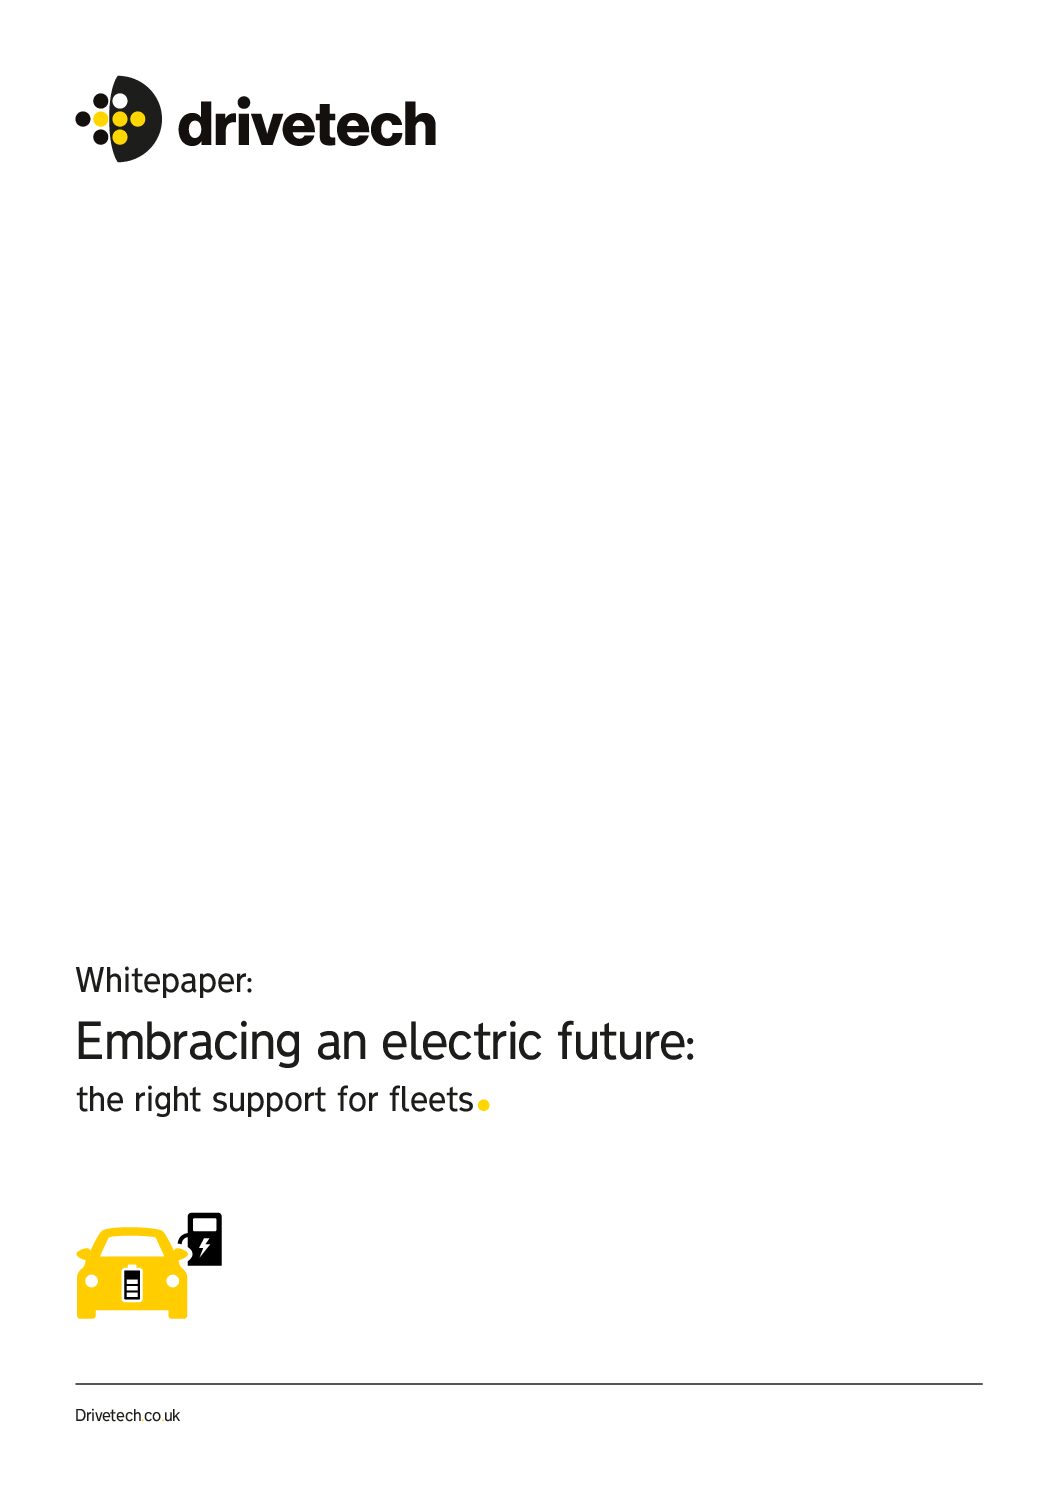 Whitepaper: Embracing an Electric Future